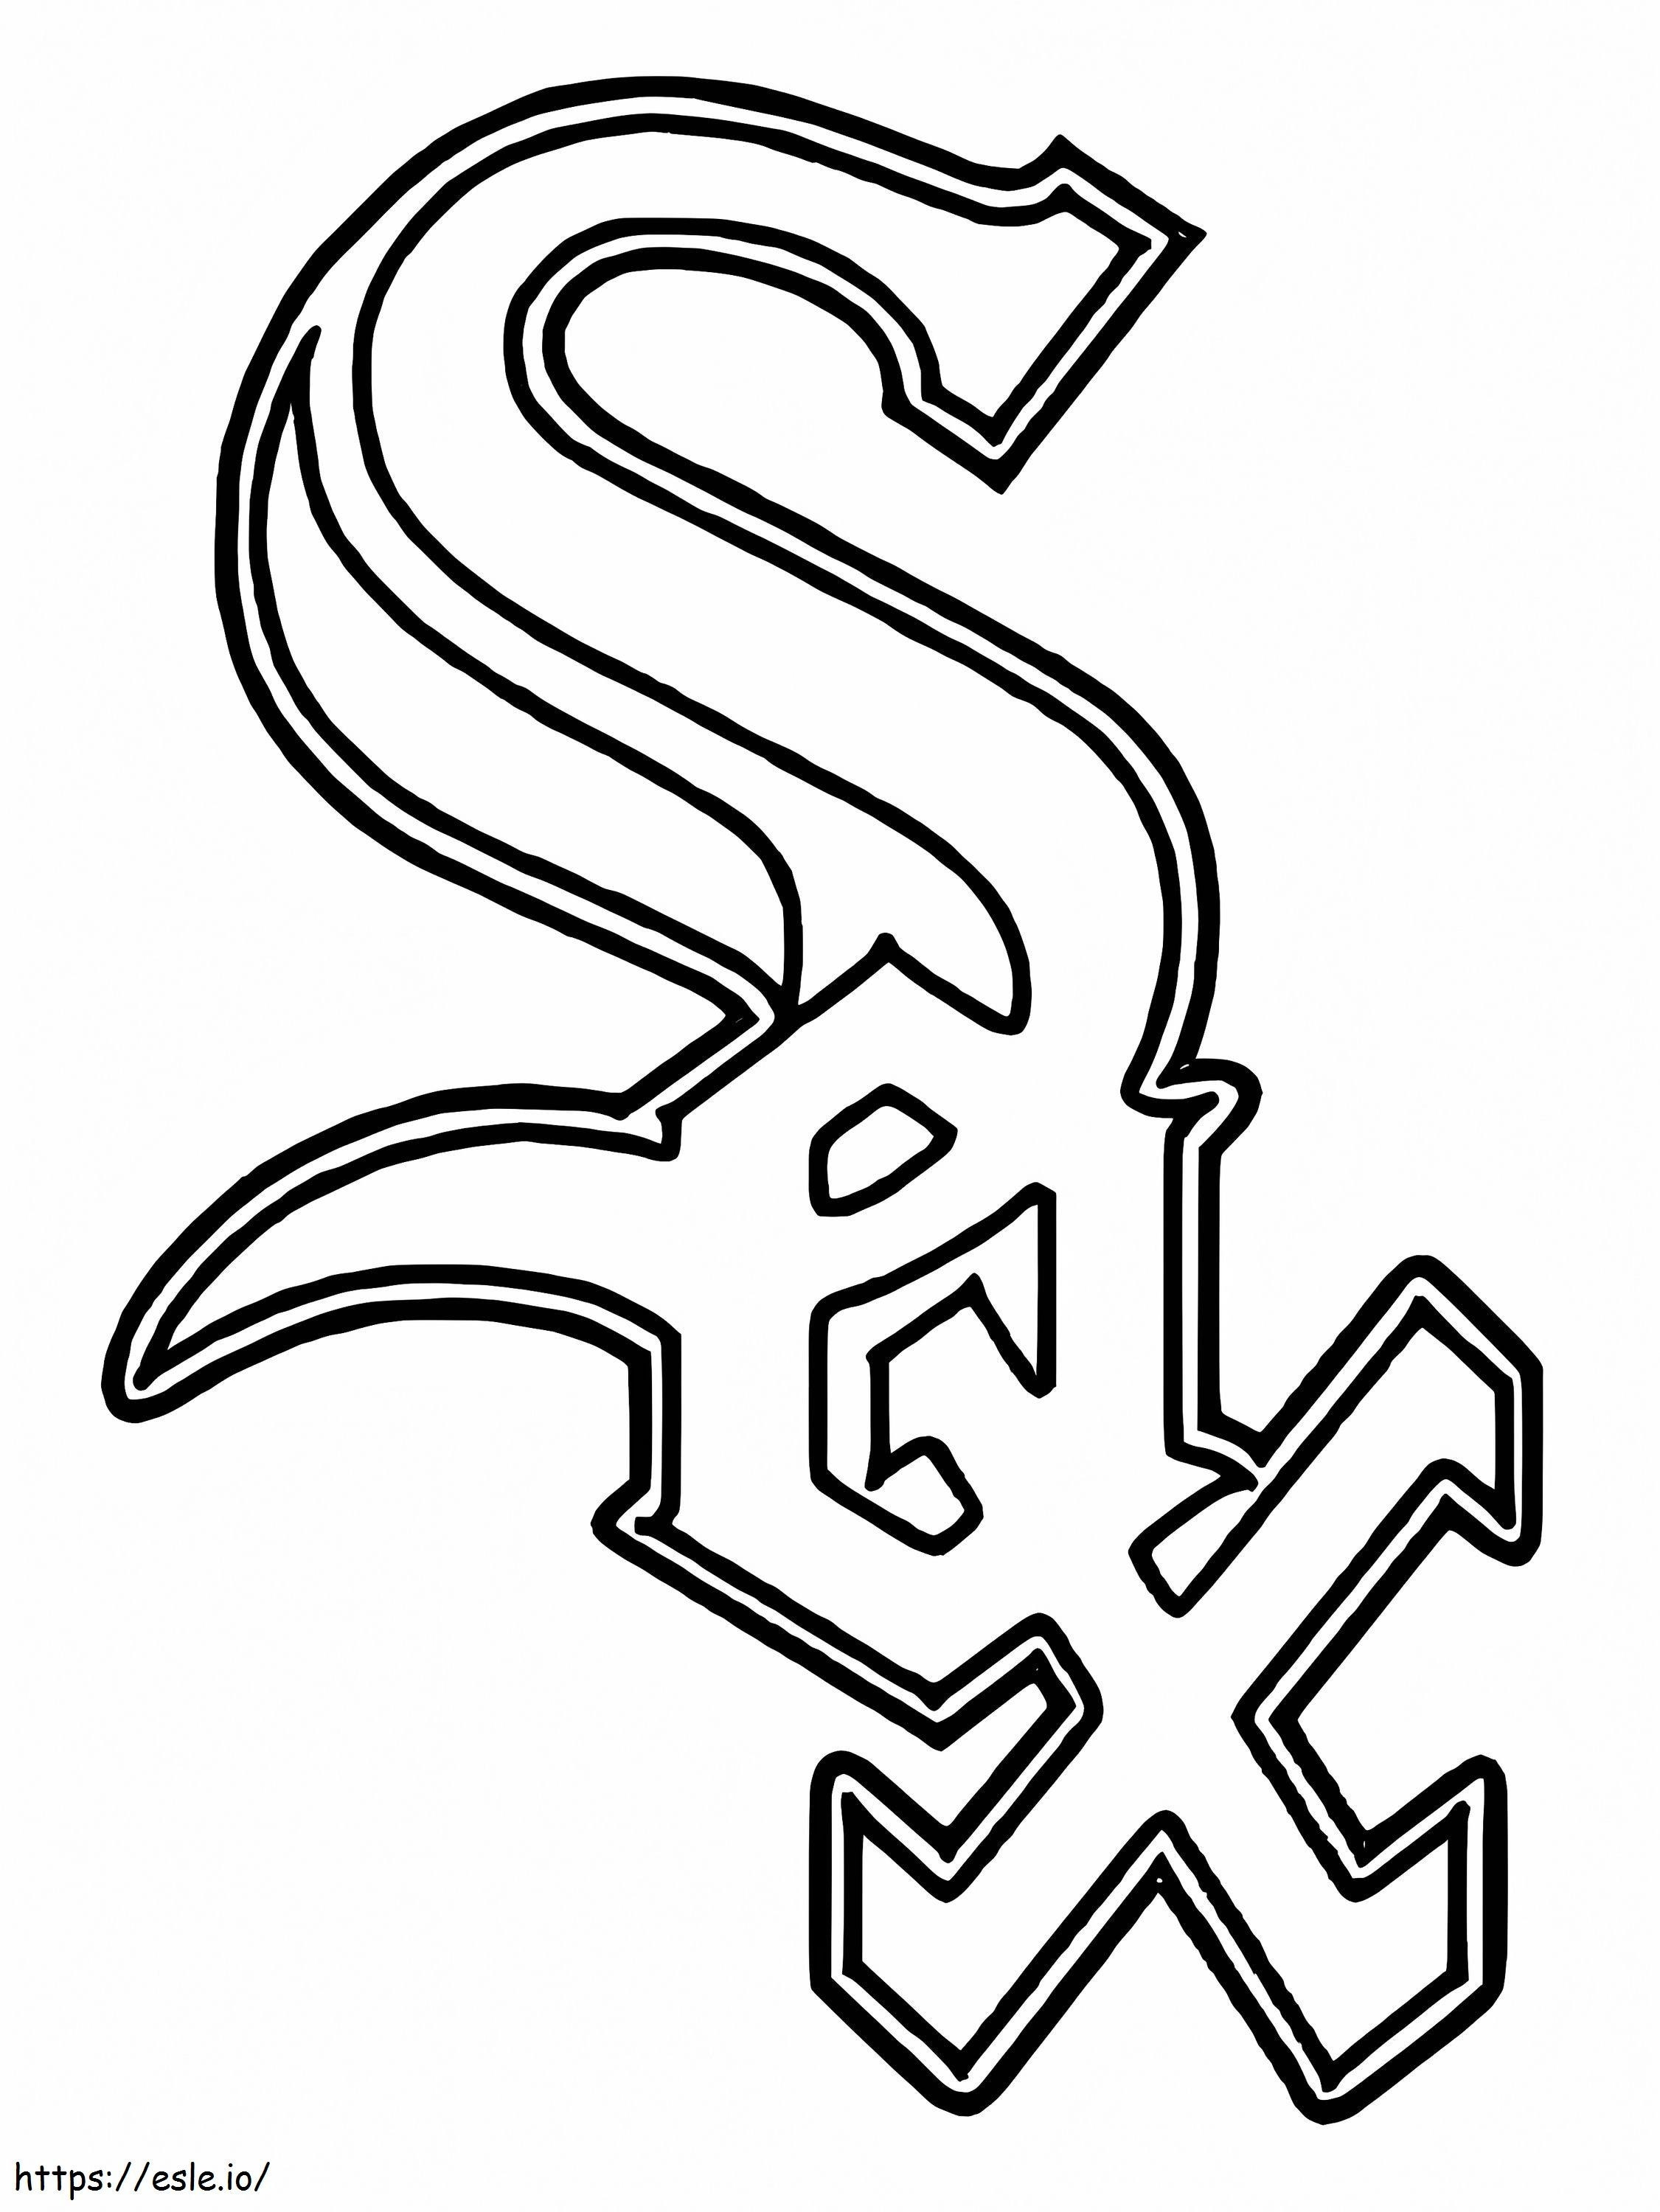 Chicago White Sox Logo coloring page